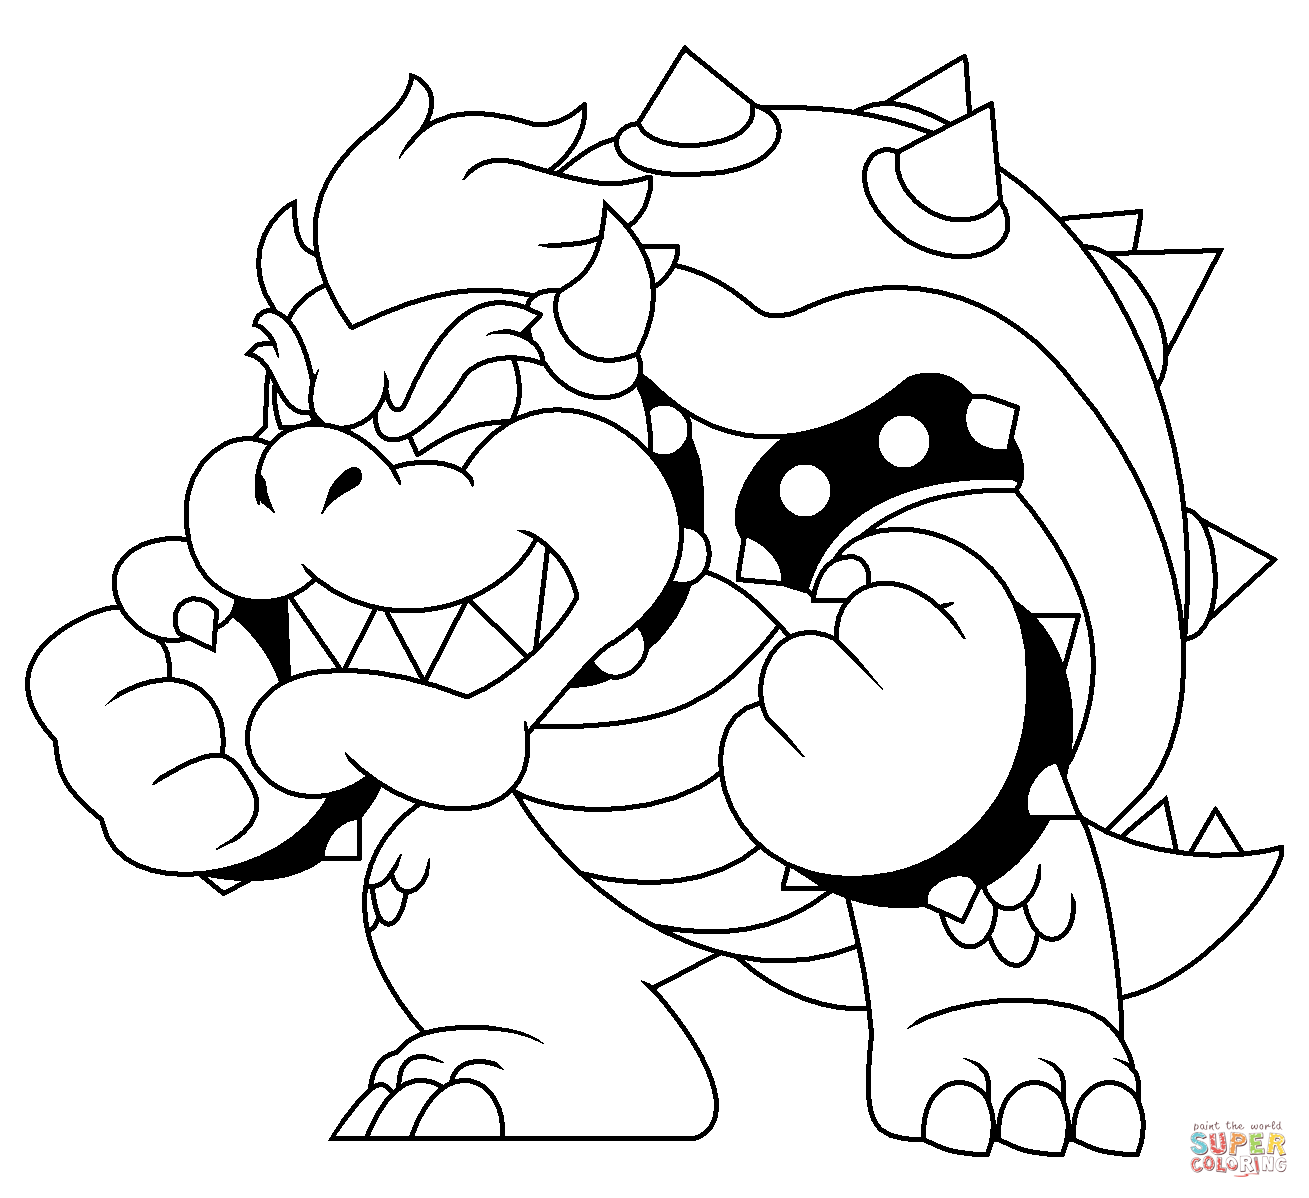 bowser-coloring-pages-online-coloring-home